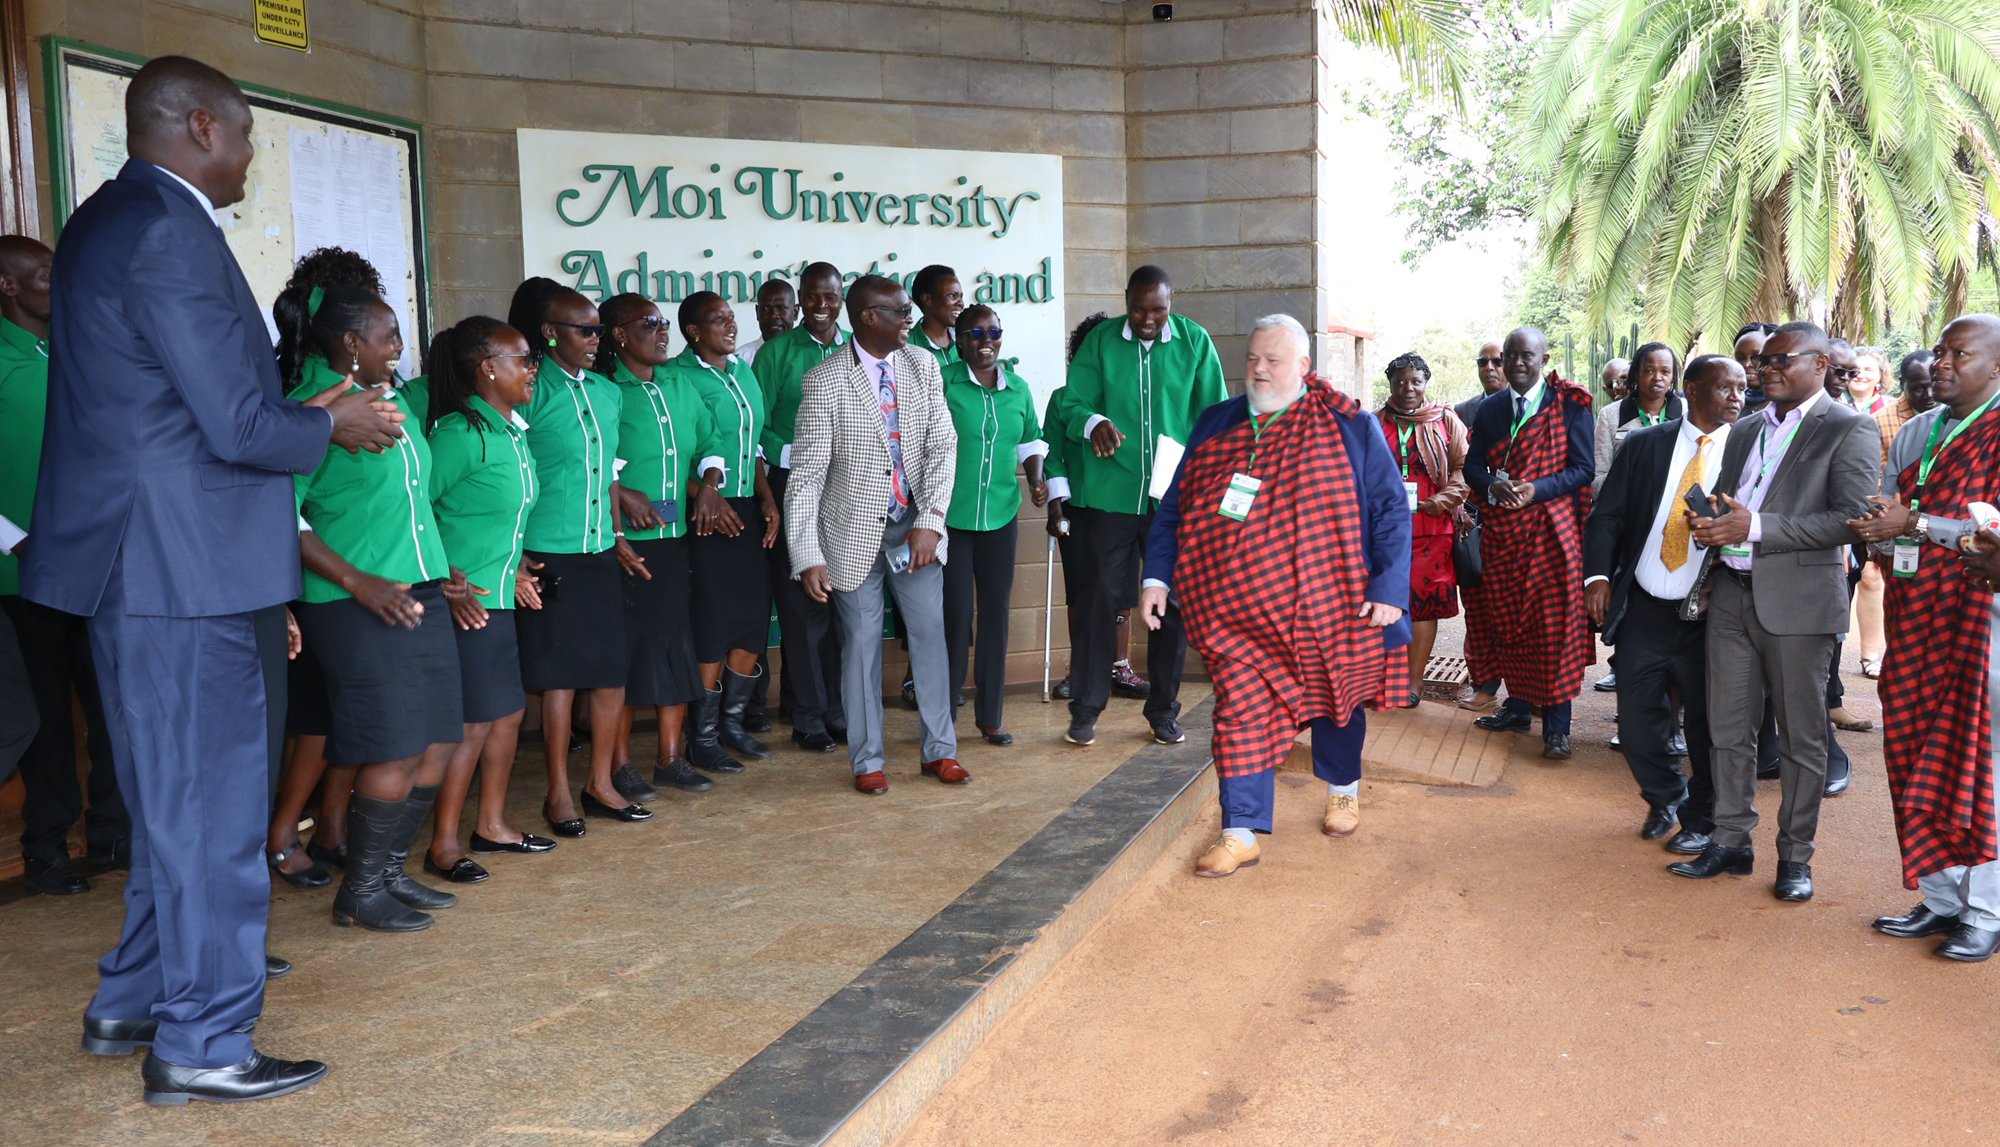 Vice Chancellor, Prof. Isaac S. Kogey and the University Choir receive the guests at Main Campus administration building